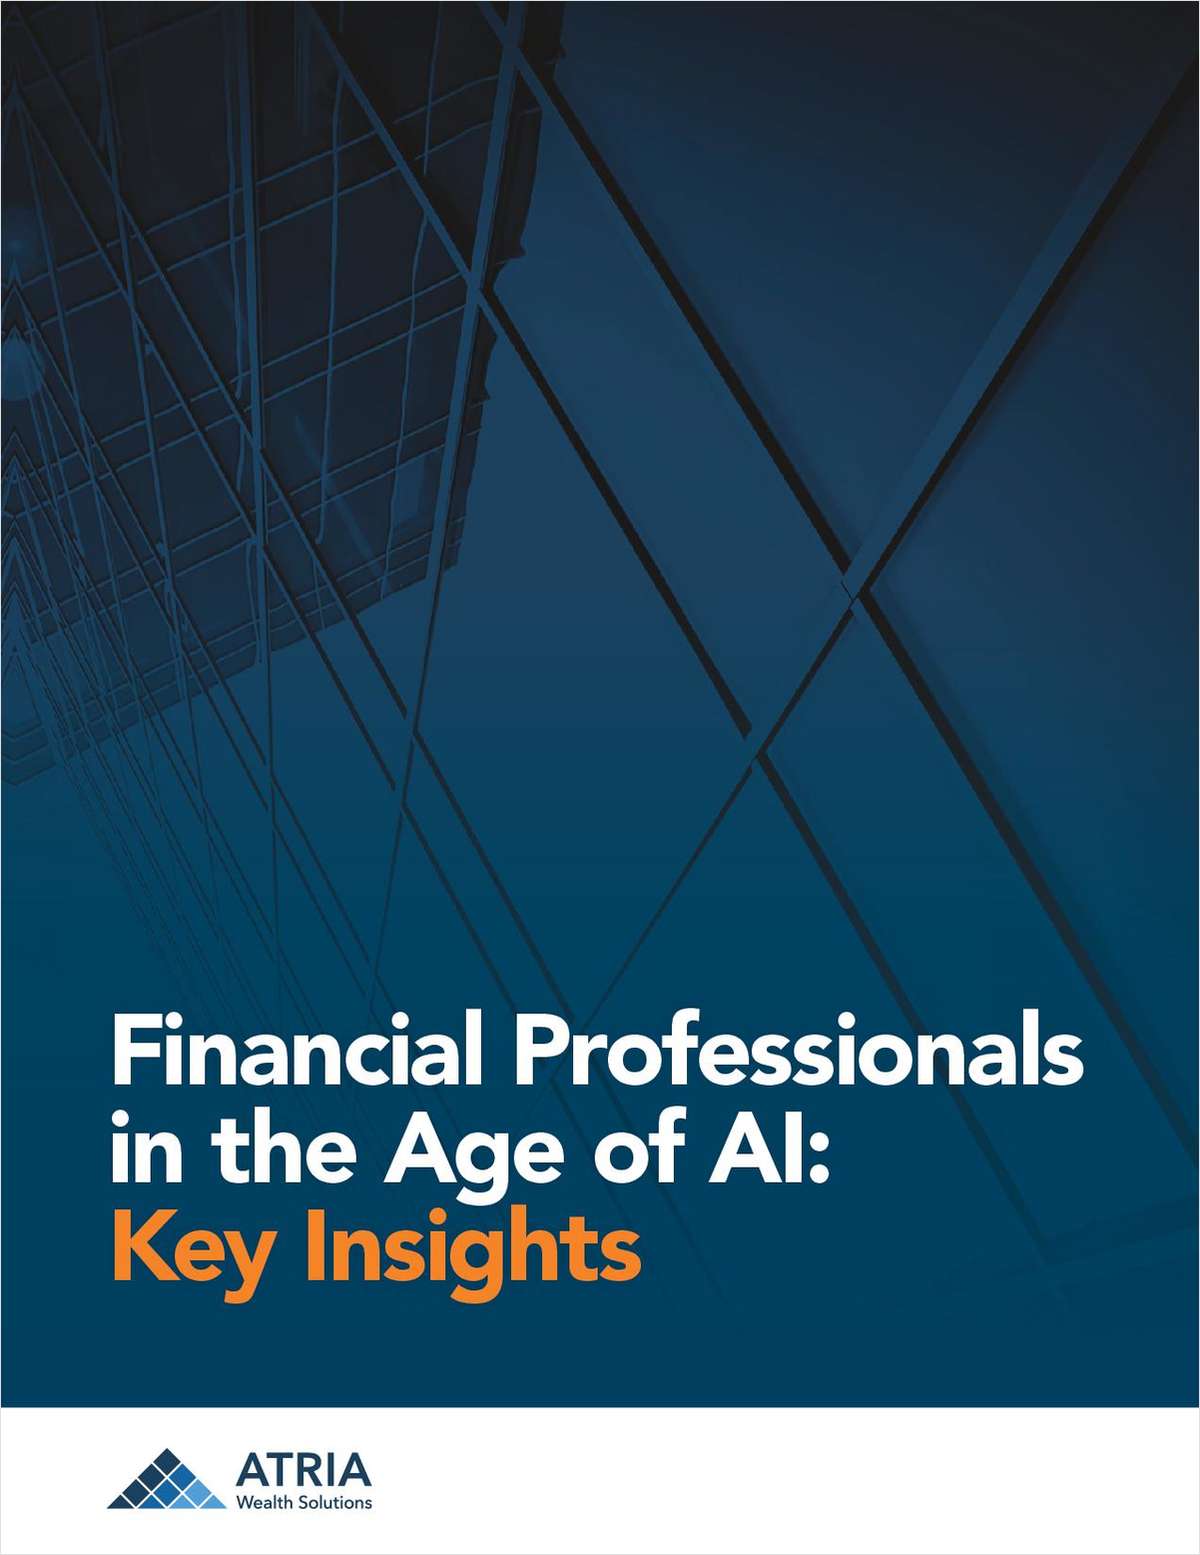 Financial Professionals in the Age of AI: Key Insights